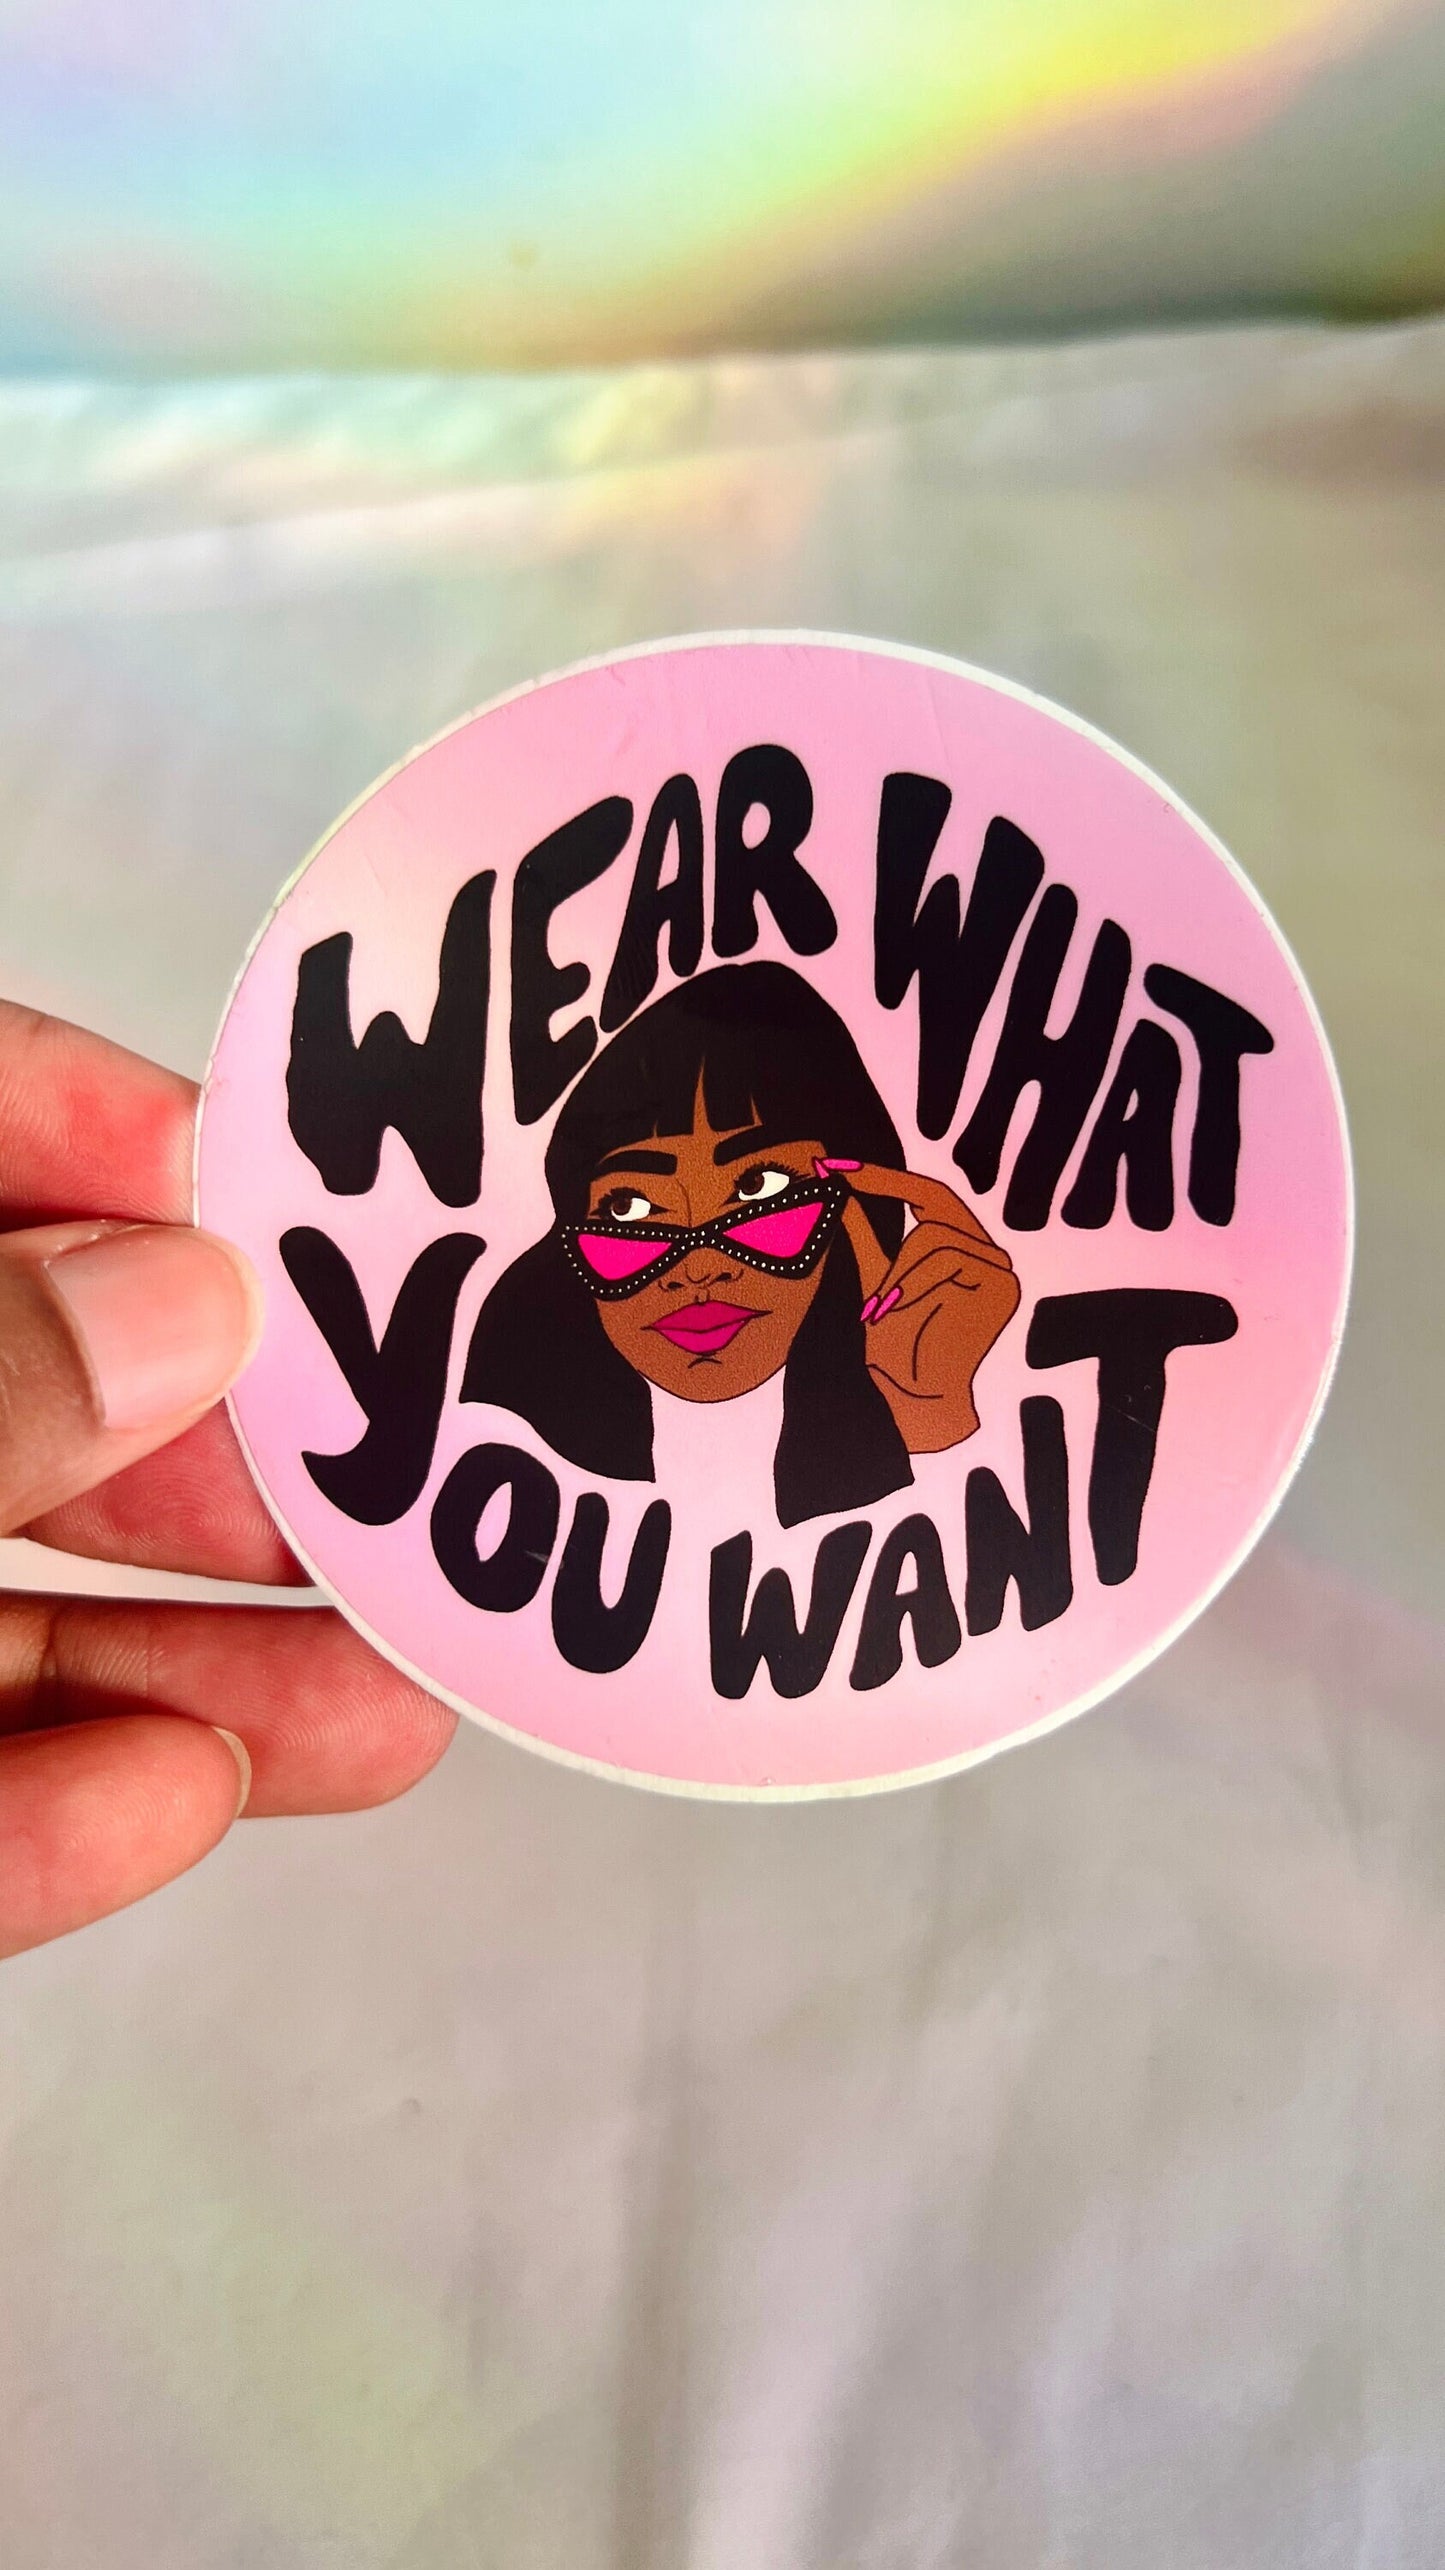 Wear What You Want, Black Woman Quote 3in Pink Matte Vinyl Waterproof Sticker, Black Girl, Unbothered, Weatherproof Sticker, Body Positive